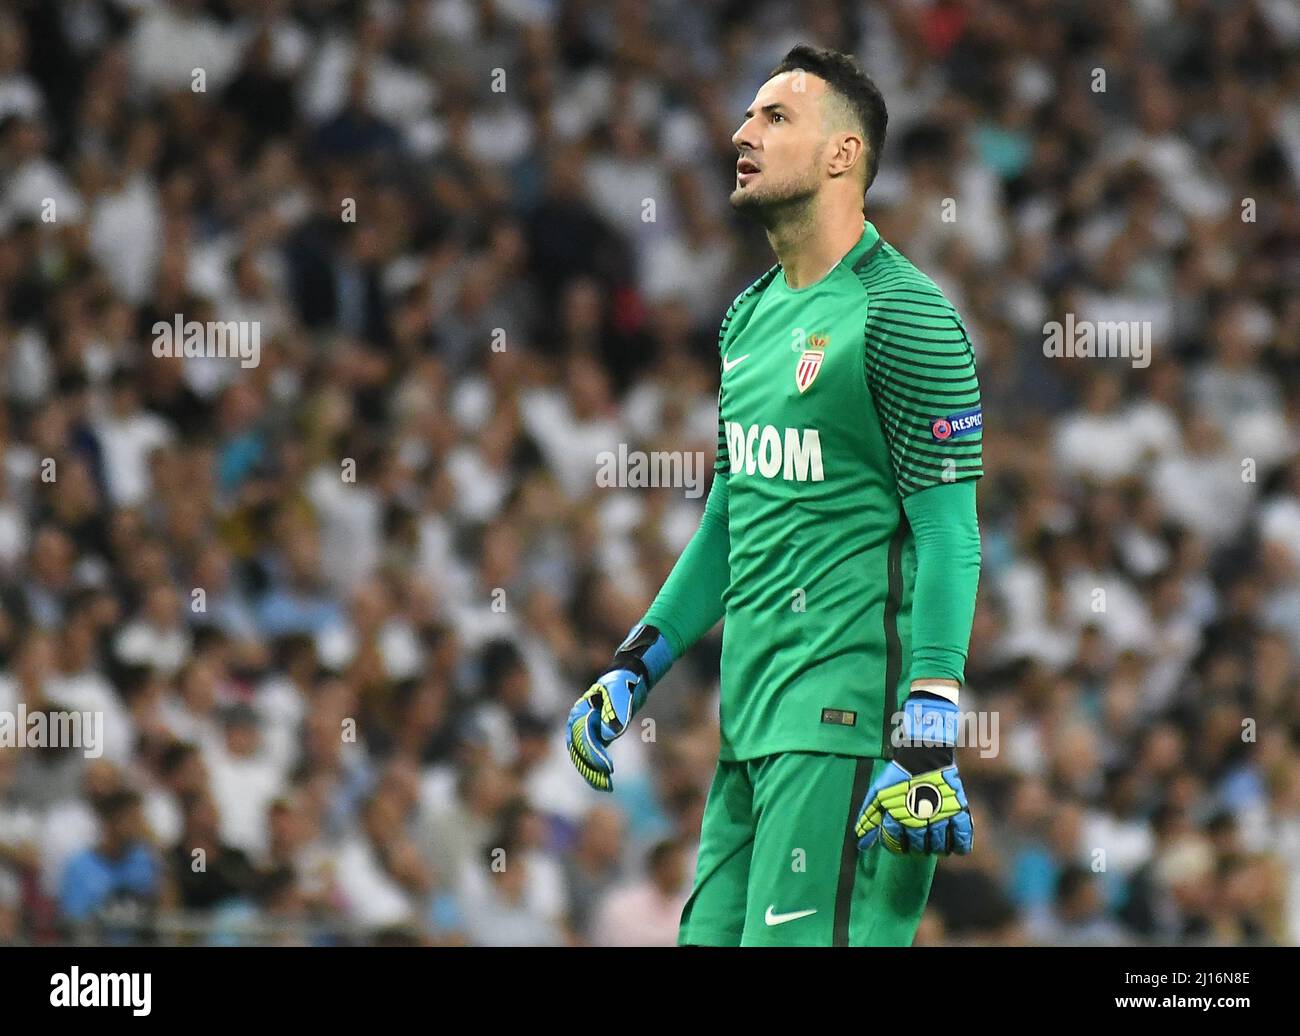 MANCHESTER, ENGLAND - SEPTEMBER 14, 2016: Danijel Subasic of Monaco pictured in action during the UEFA Champions League Group E game between Tottenham Hotspur and AS Monaco at Wembley Stadium. Copyright: Cosmin Iftode/Picstaff Stock Photo